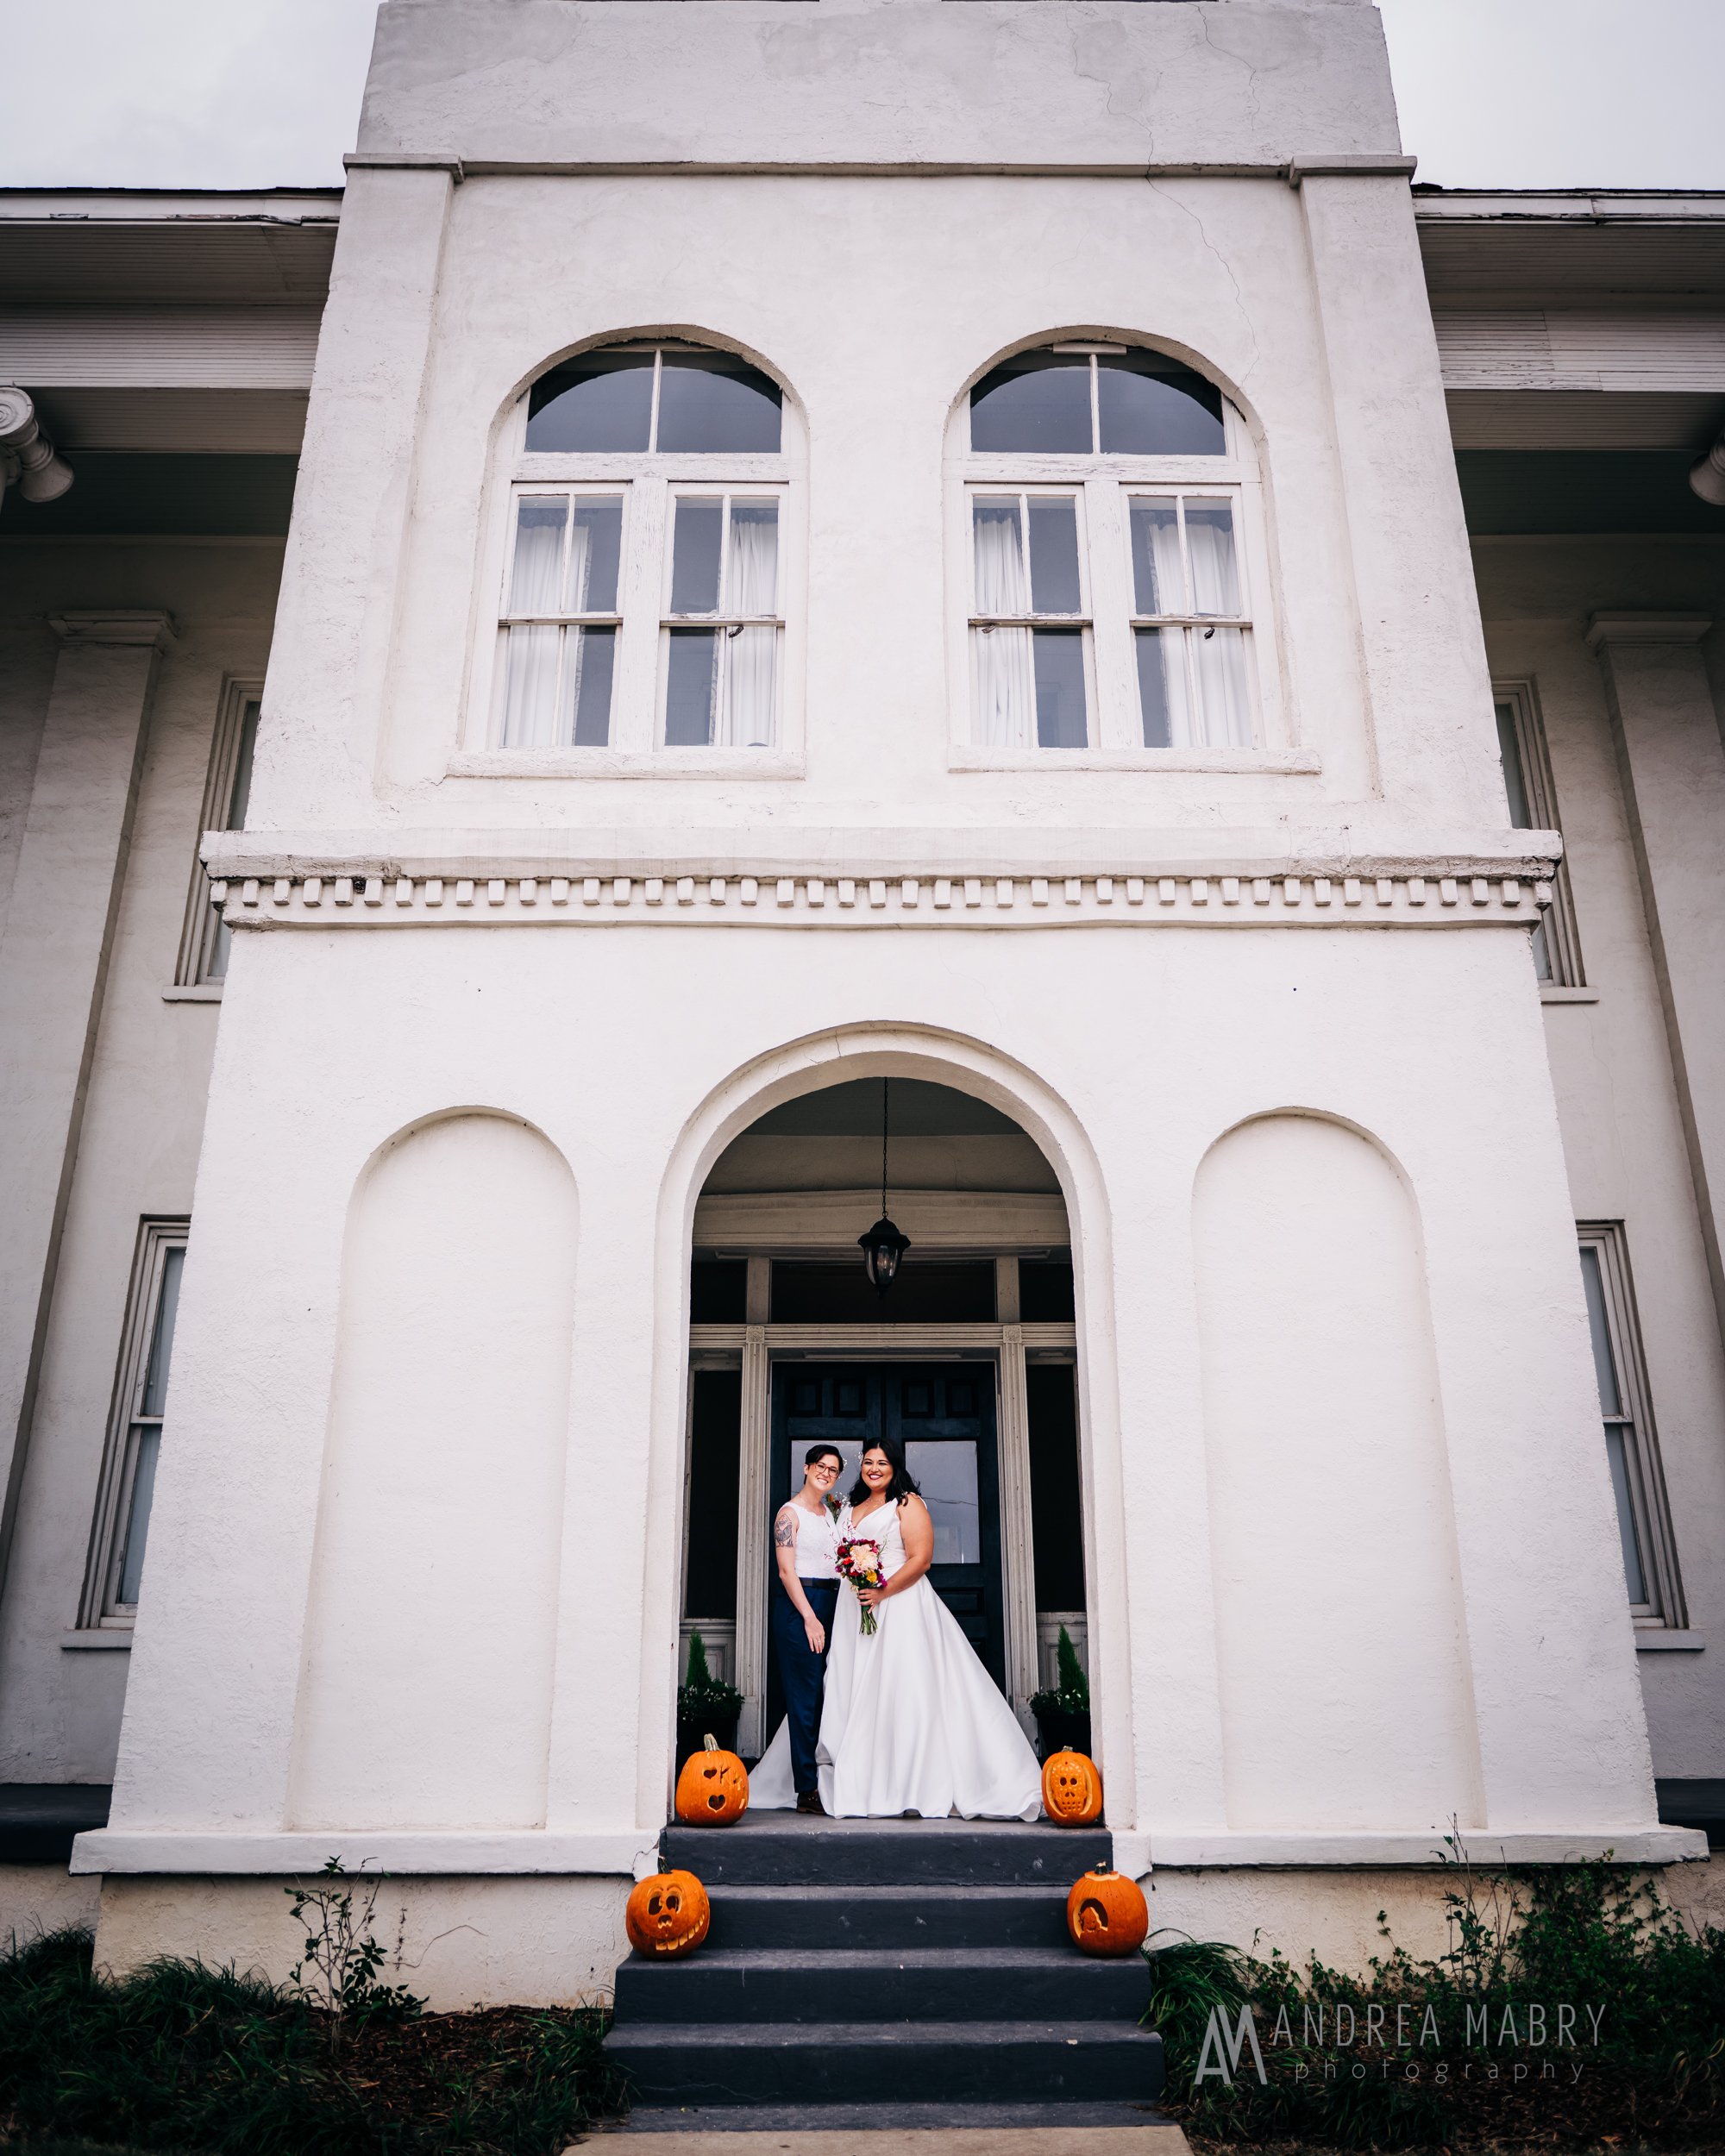 Blog — Andrea Mabry Birmingham and New Orleans Wedding Photographer